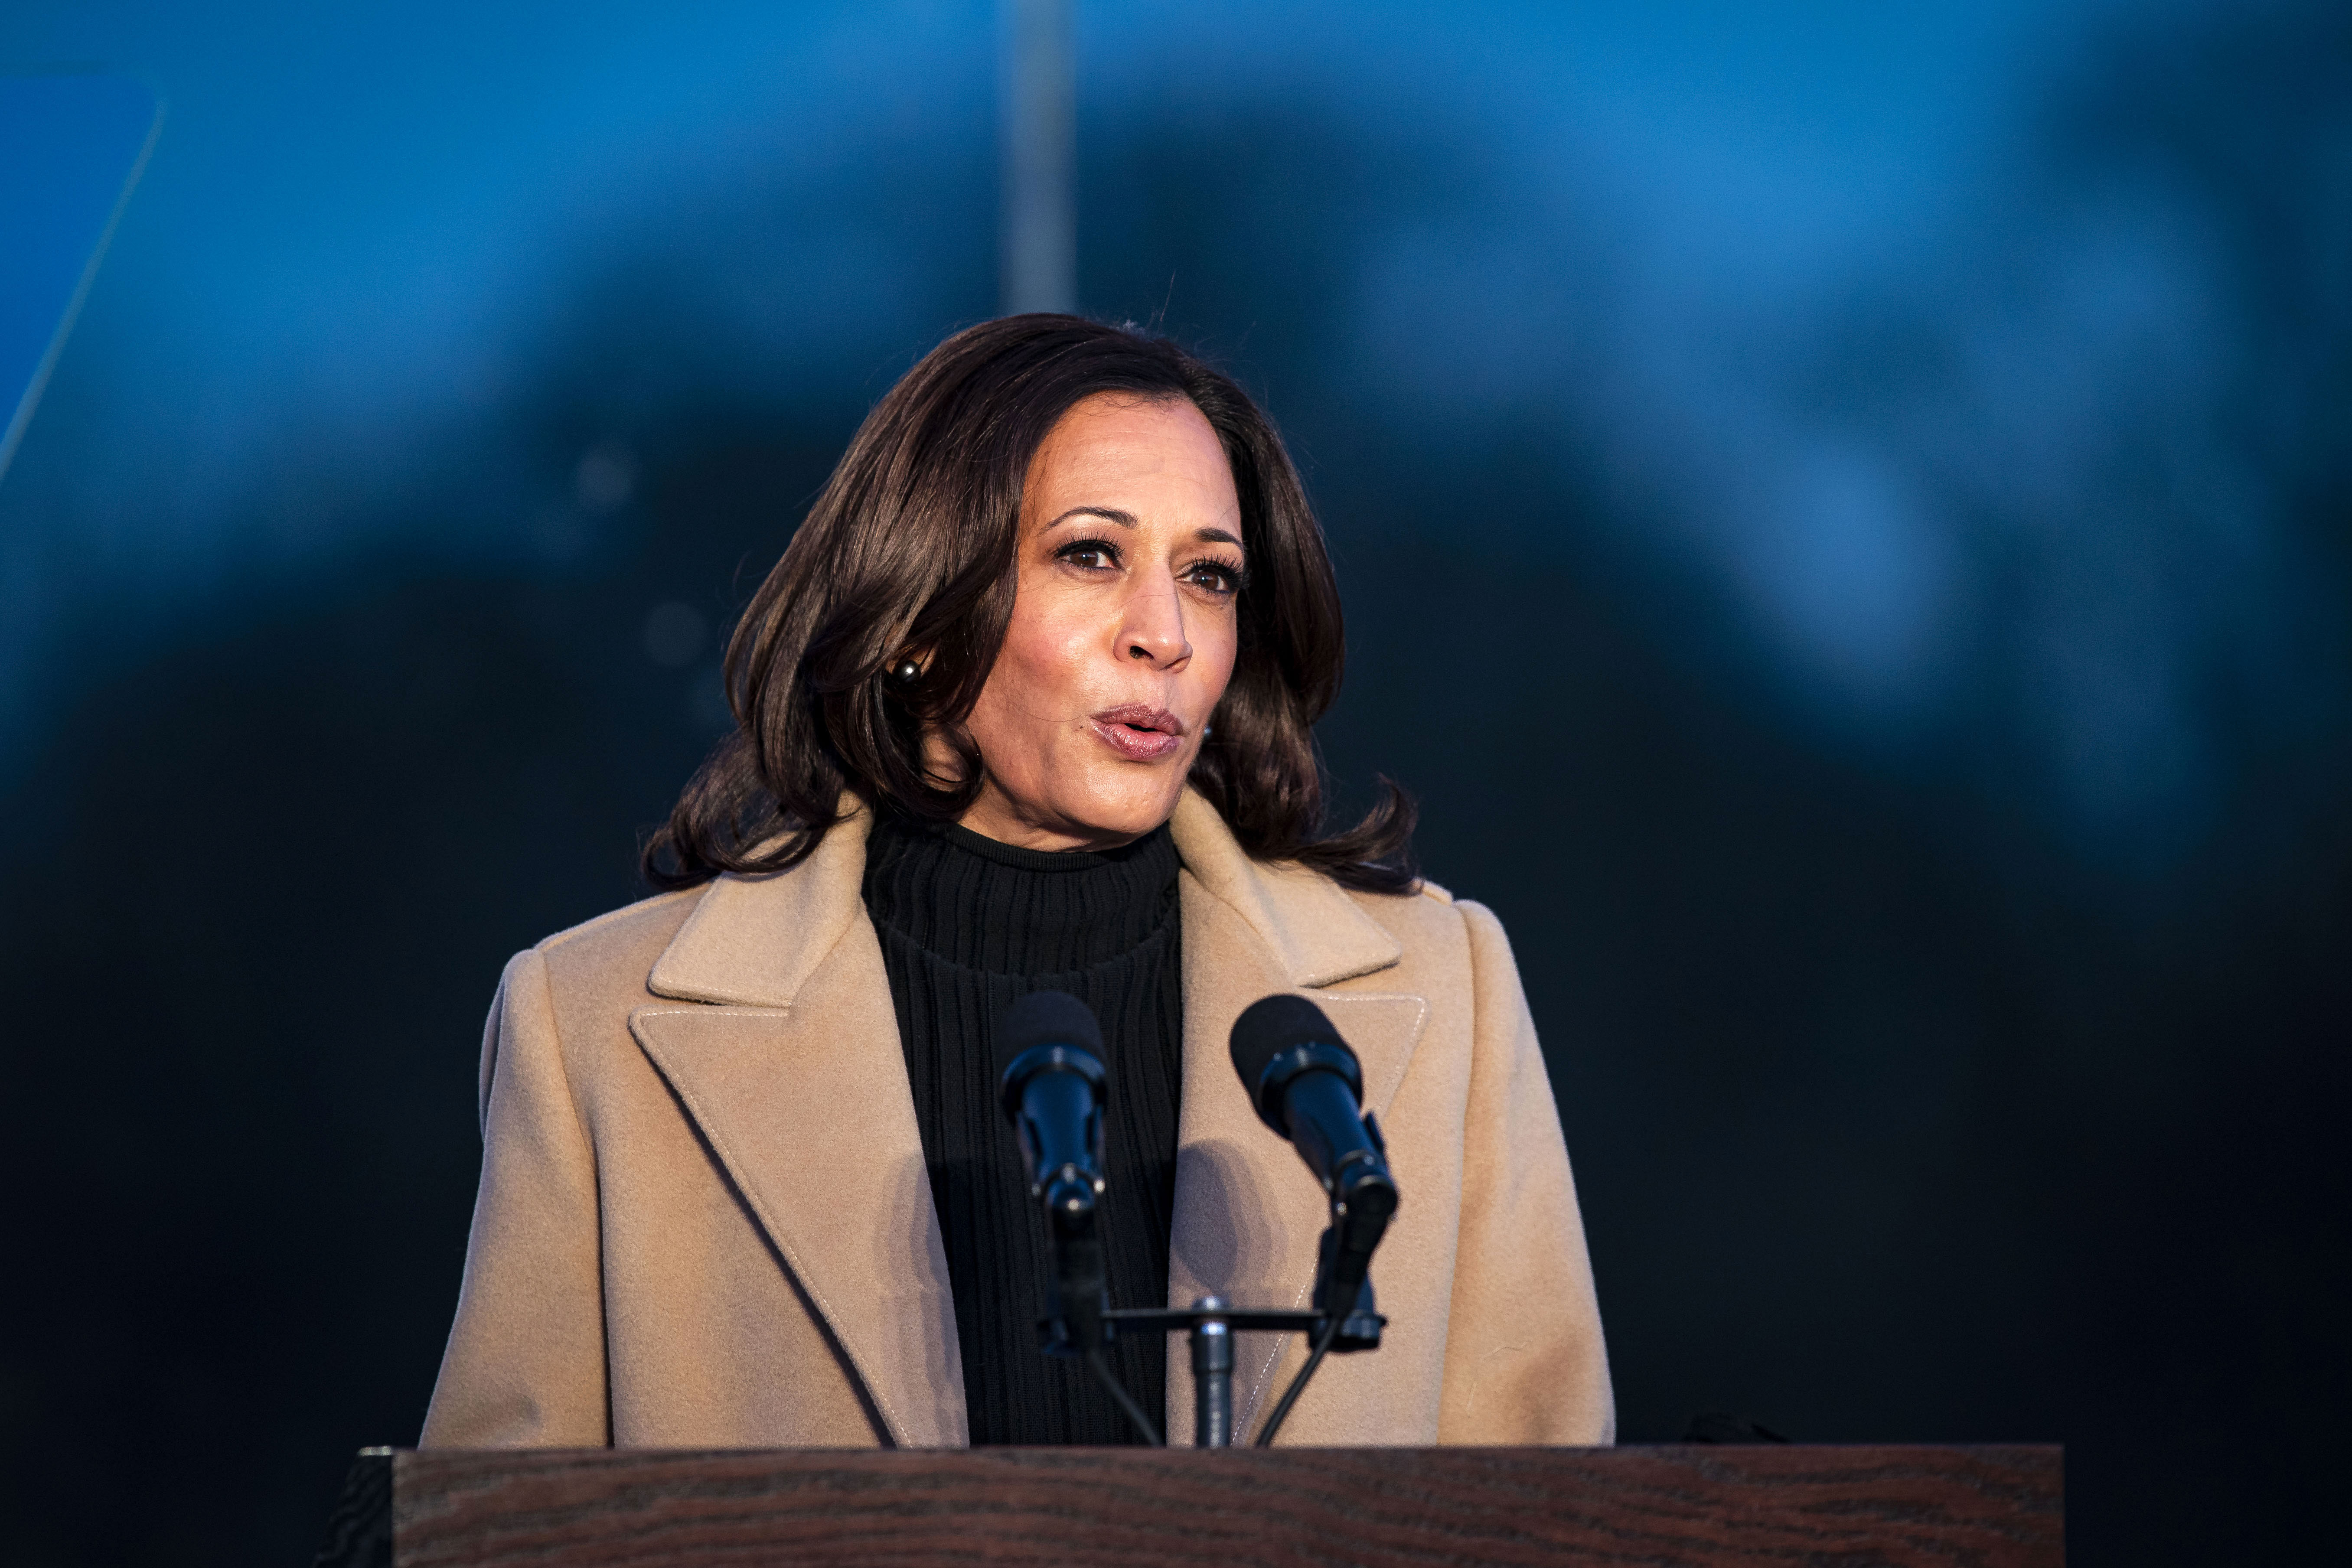 U.S. Vice President-elect Kamala Harris speaks at a Covid-19 memorial in Washington, D.C., on January 19. The memorial paid tribute to Americans who have died because of the pandemic.